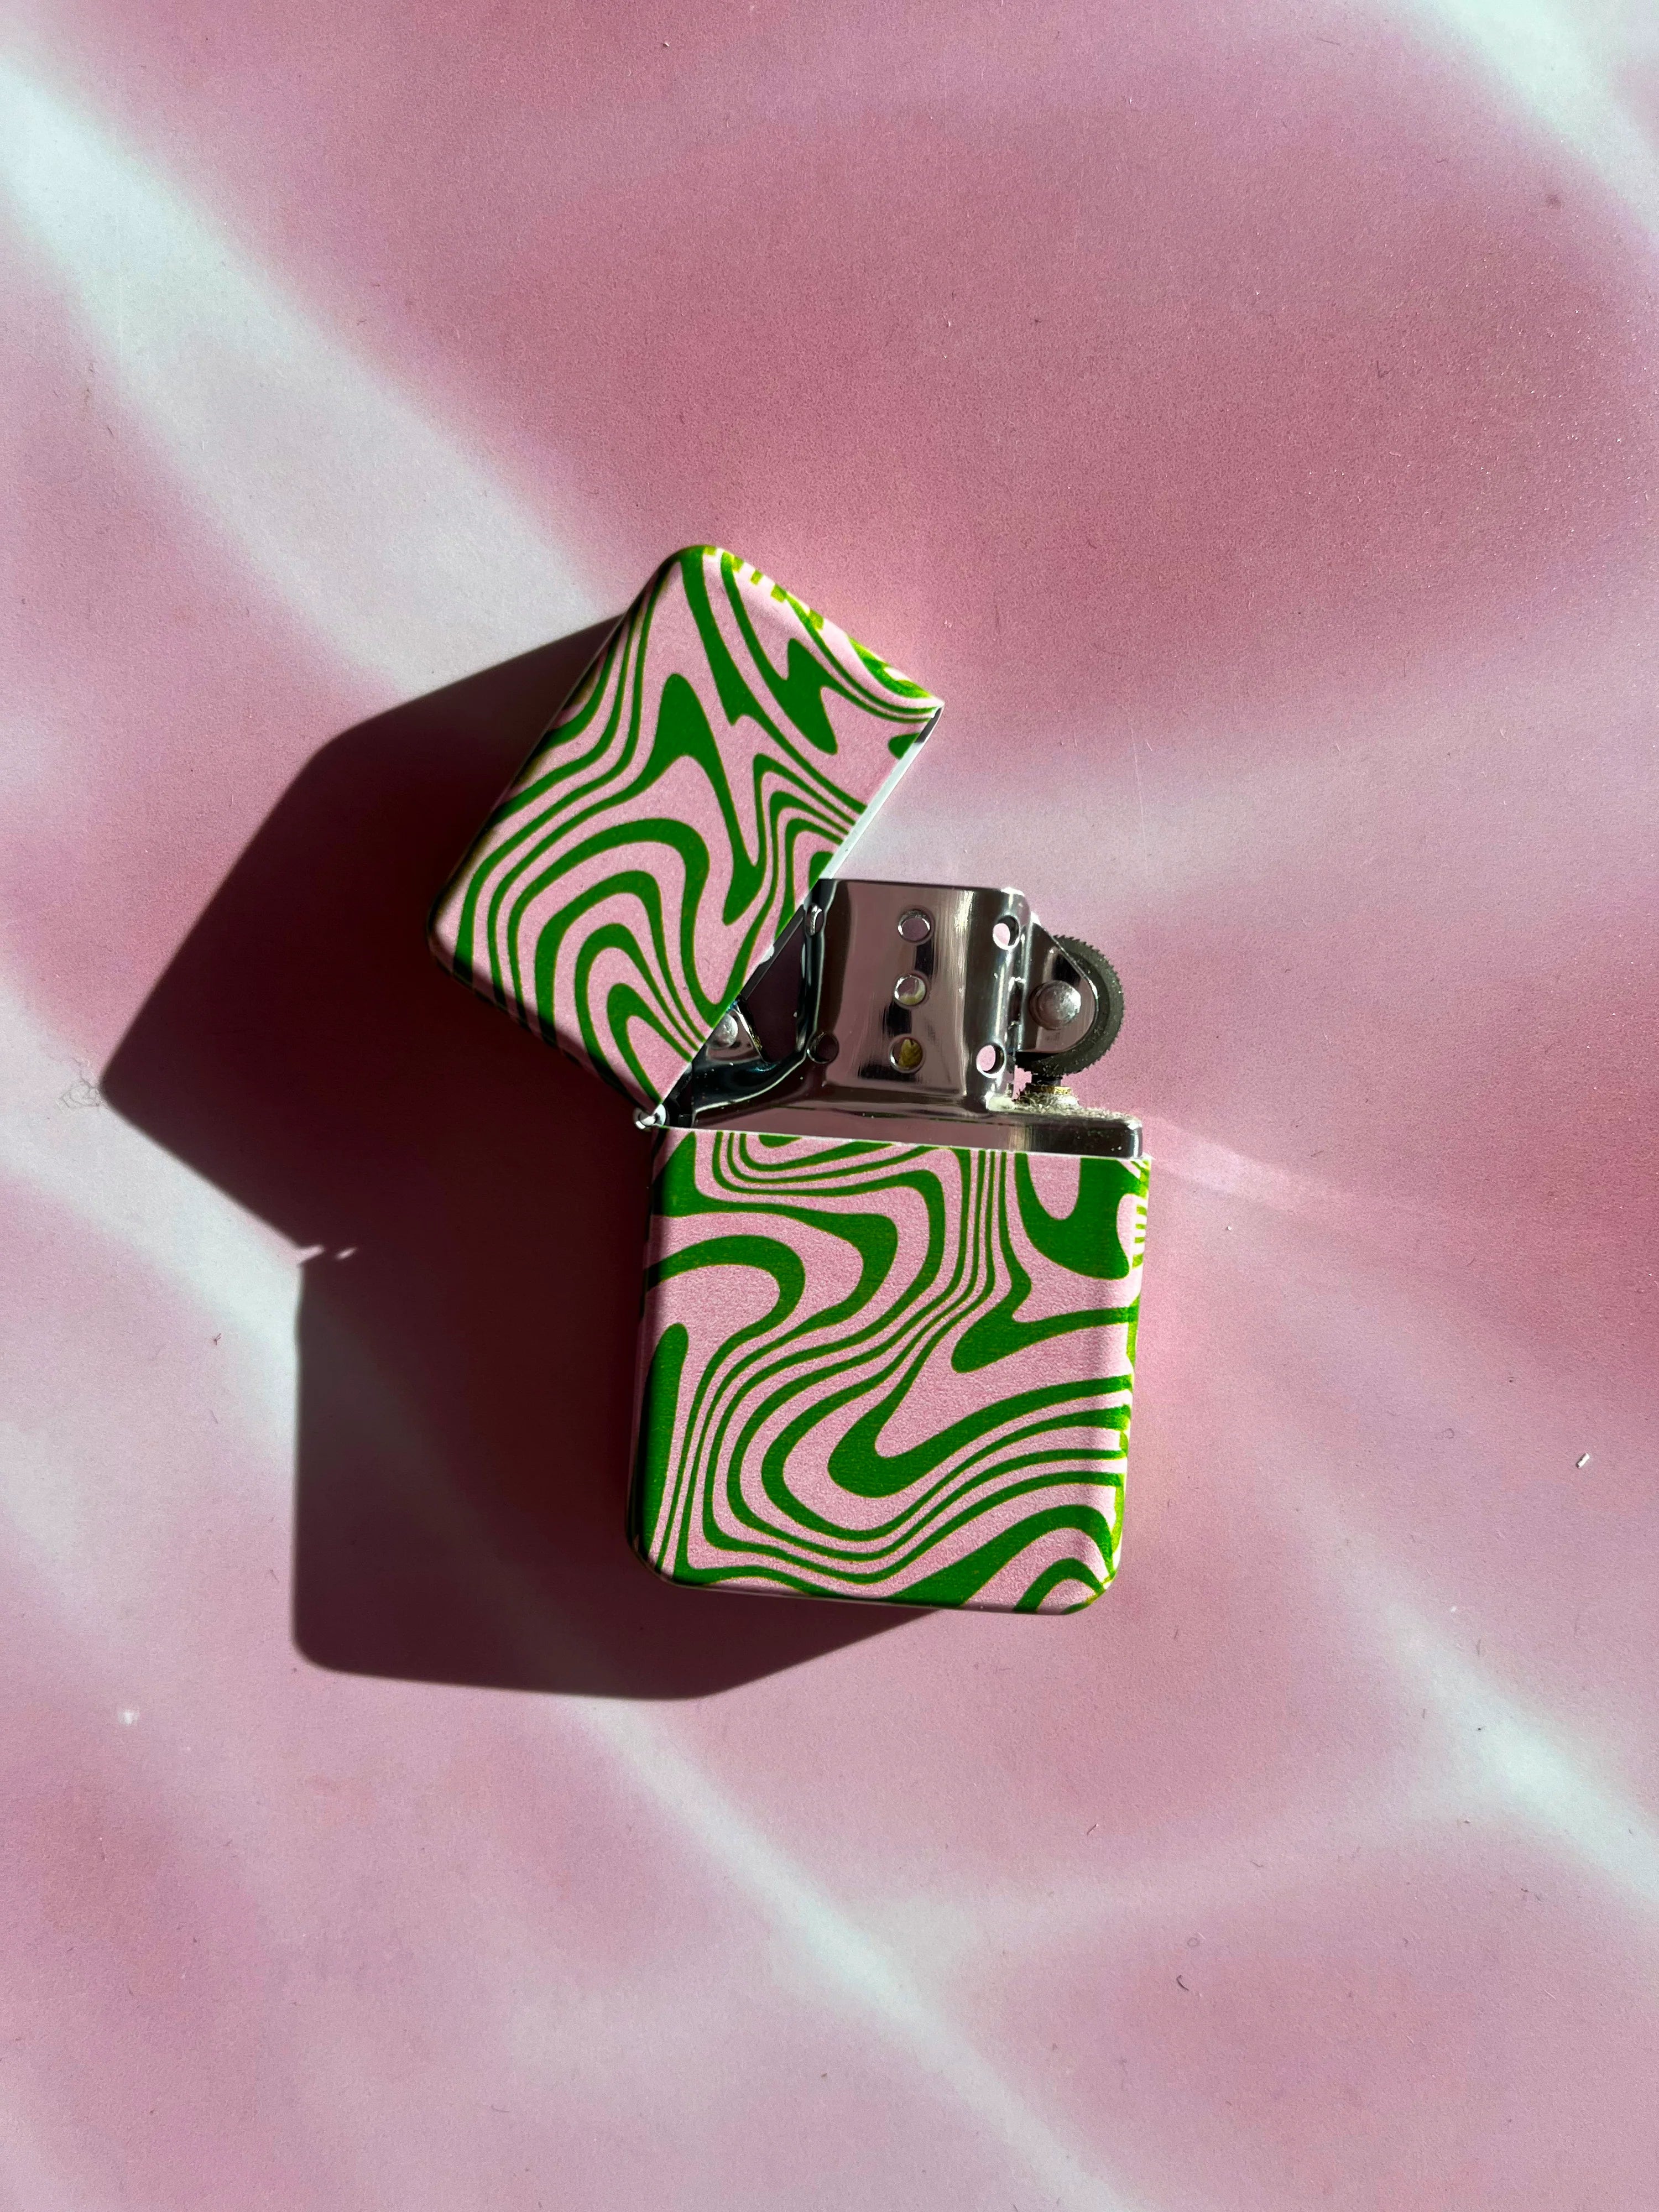 Psychedelic Swirl Lighter Relume